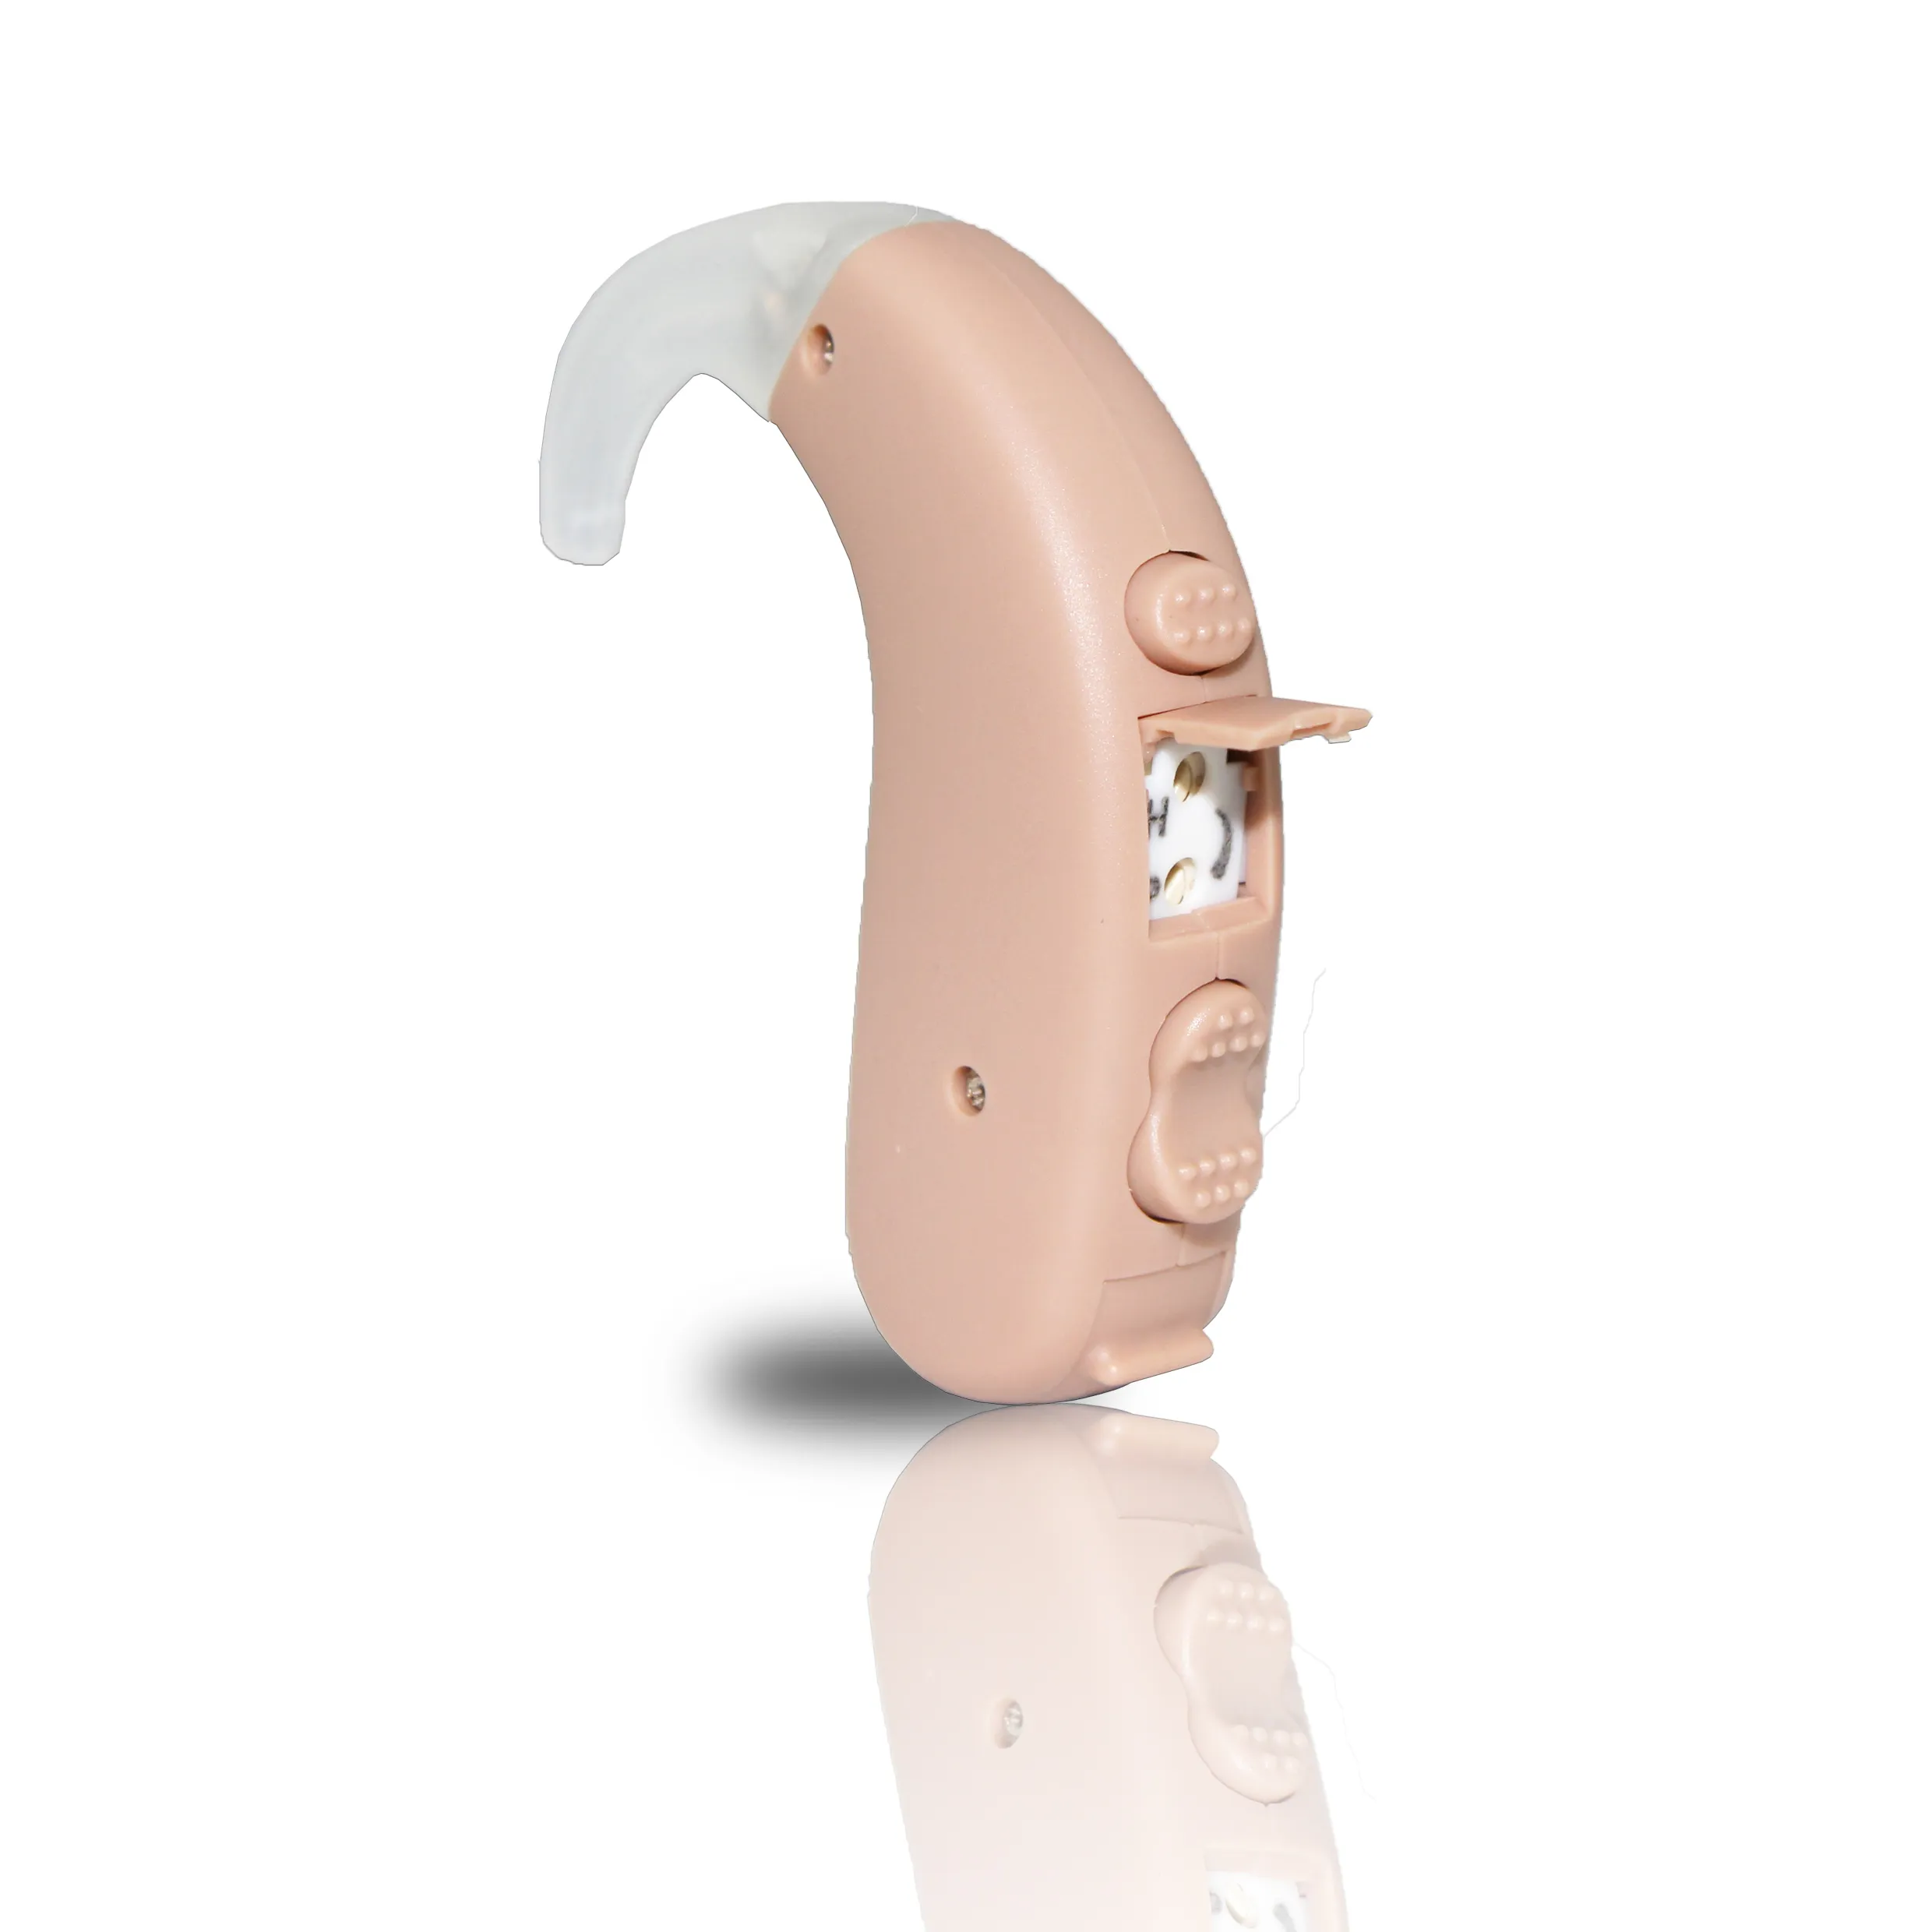 TRIMMER based hearing aid powerful digital sound amplifier ce proved same RX13 hearing aid